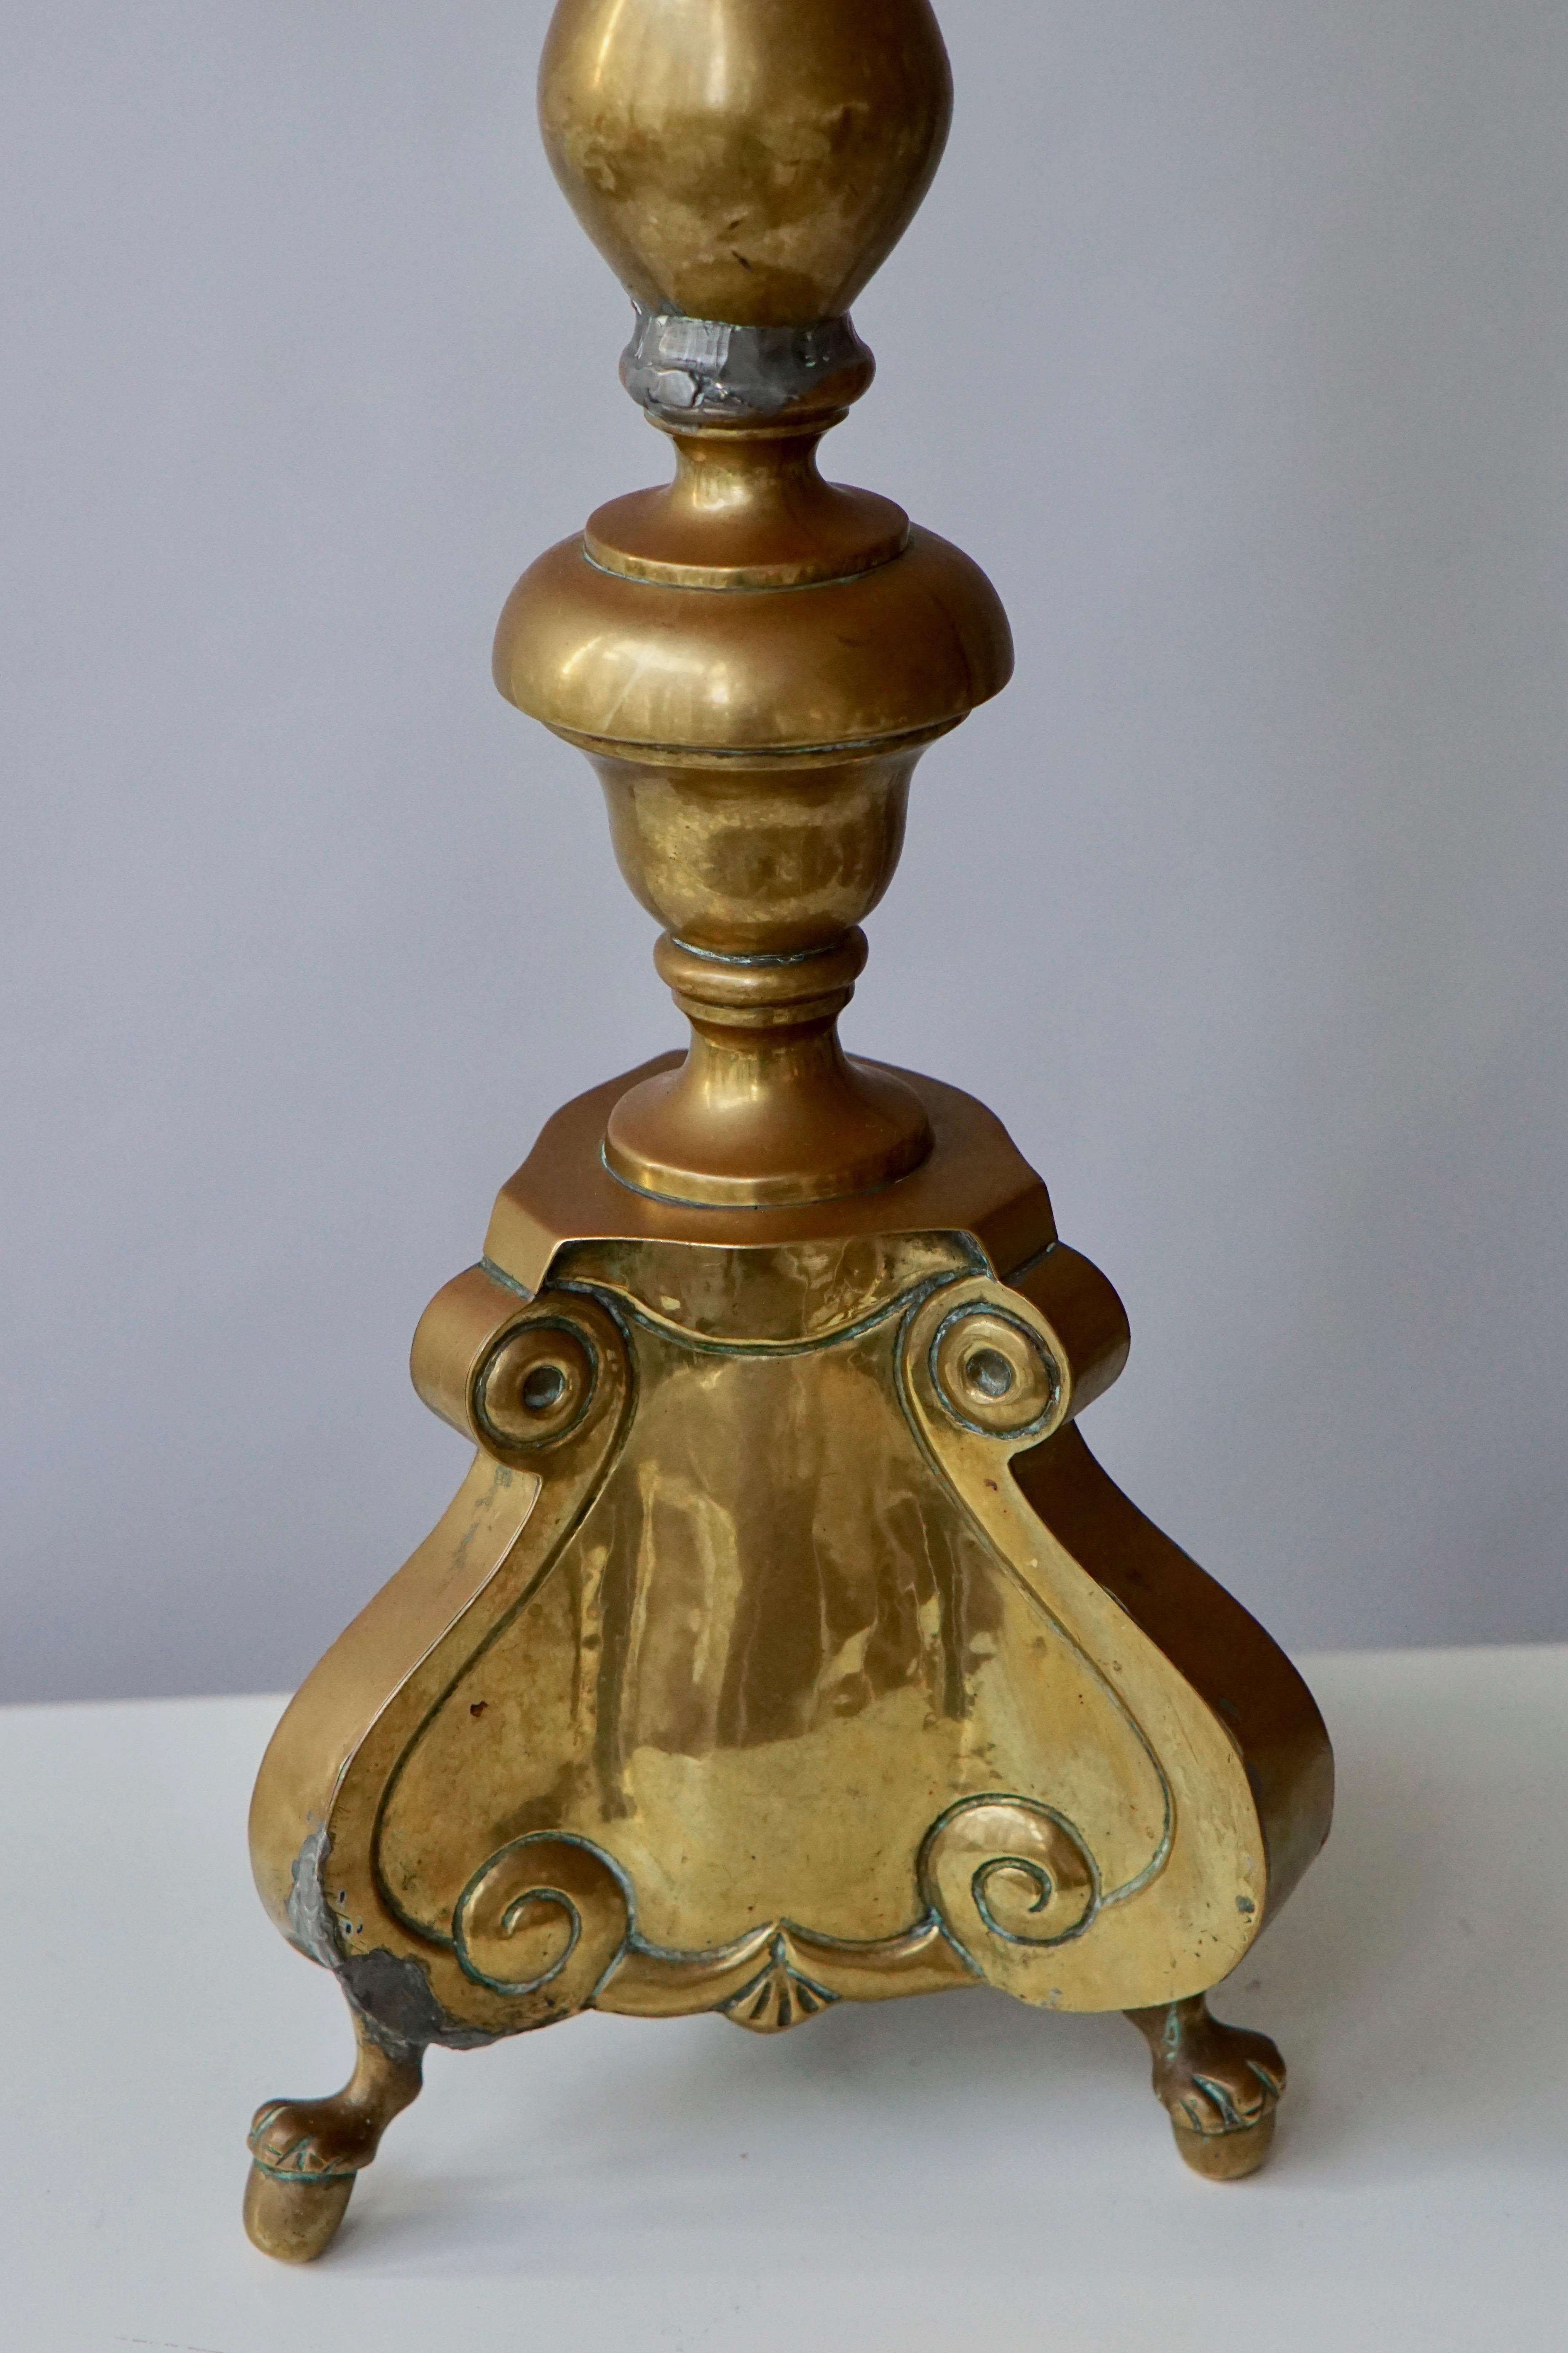 Polished Brass Tall Torchere, Candlestick or Prickets, 19th Century For Sale 1